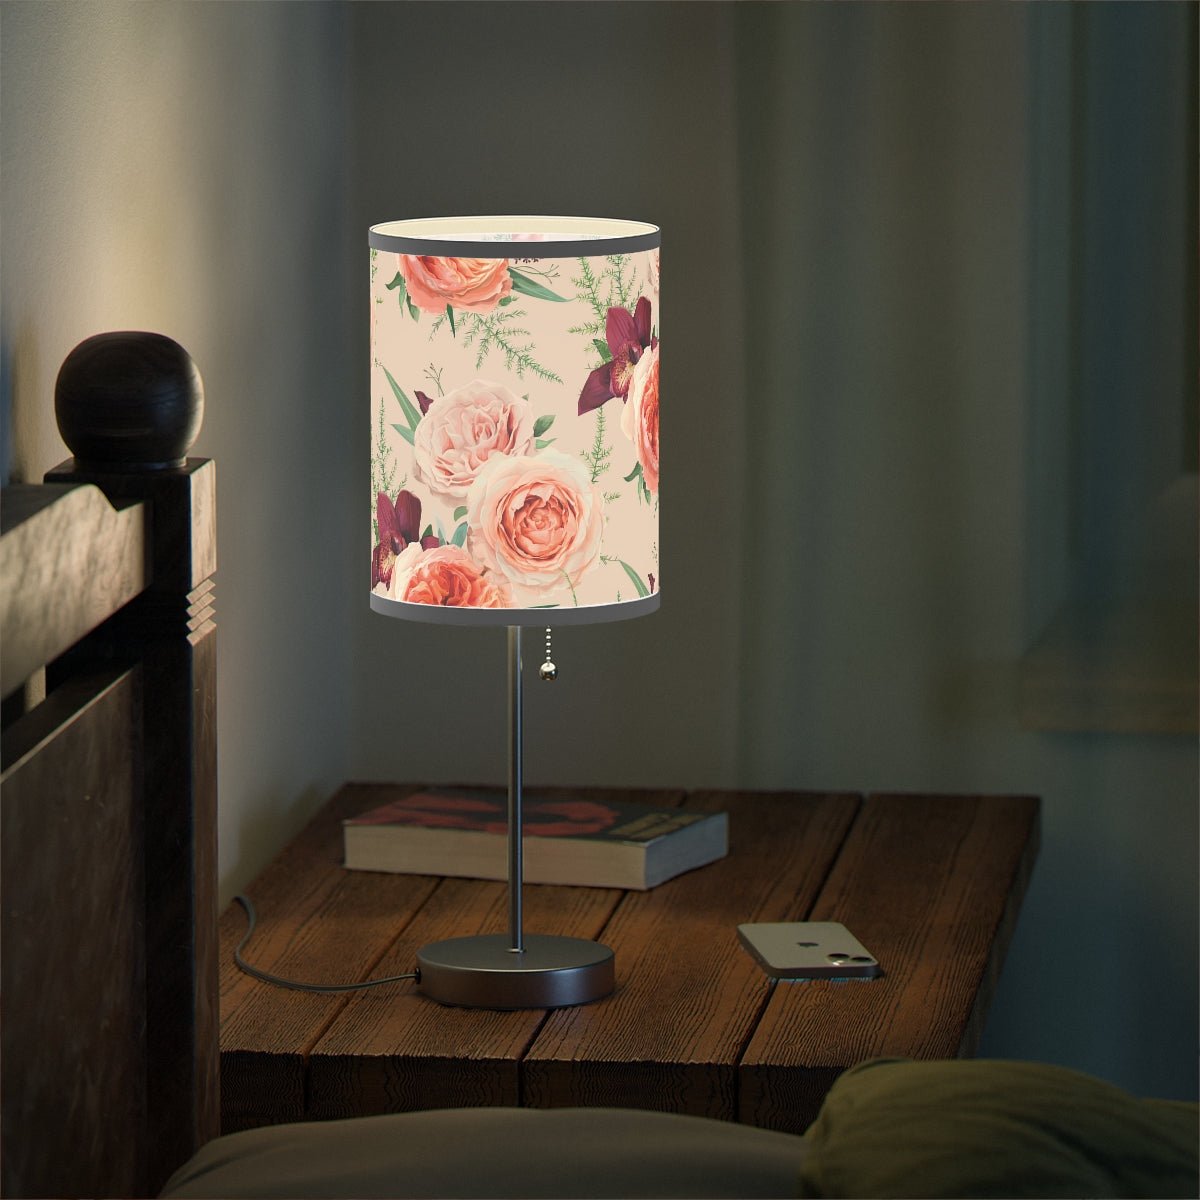 Blush Roses Table Lamp - Puffin Lime